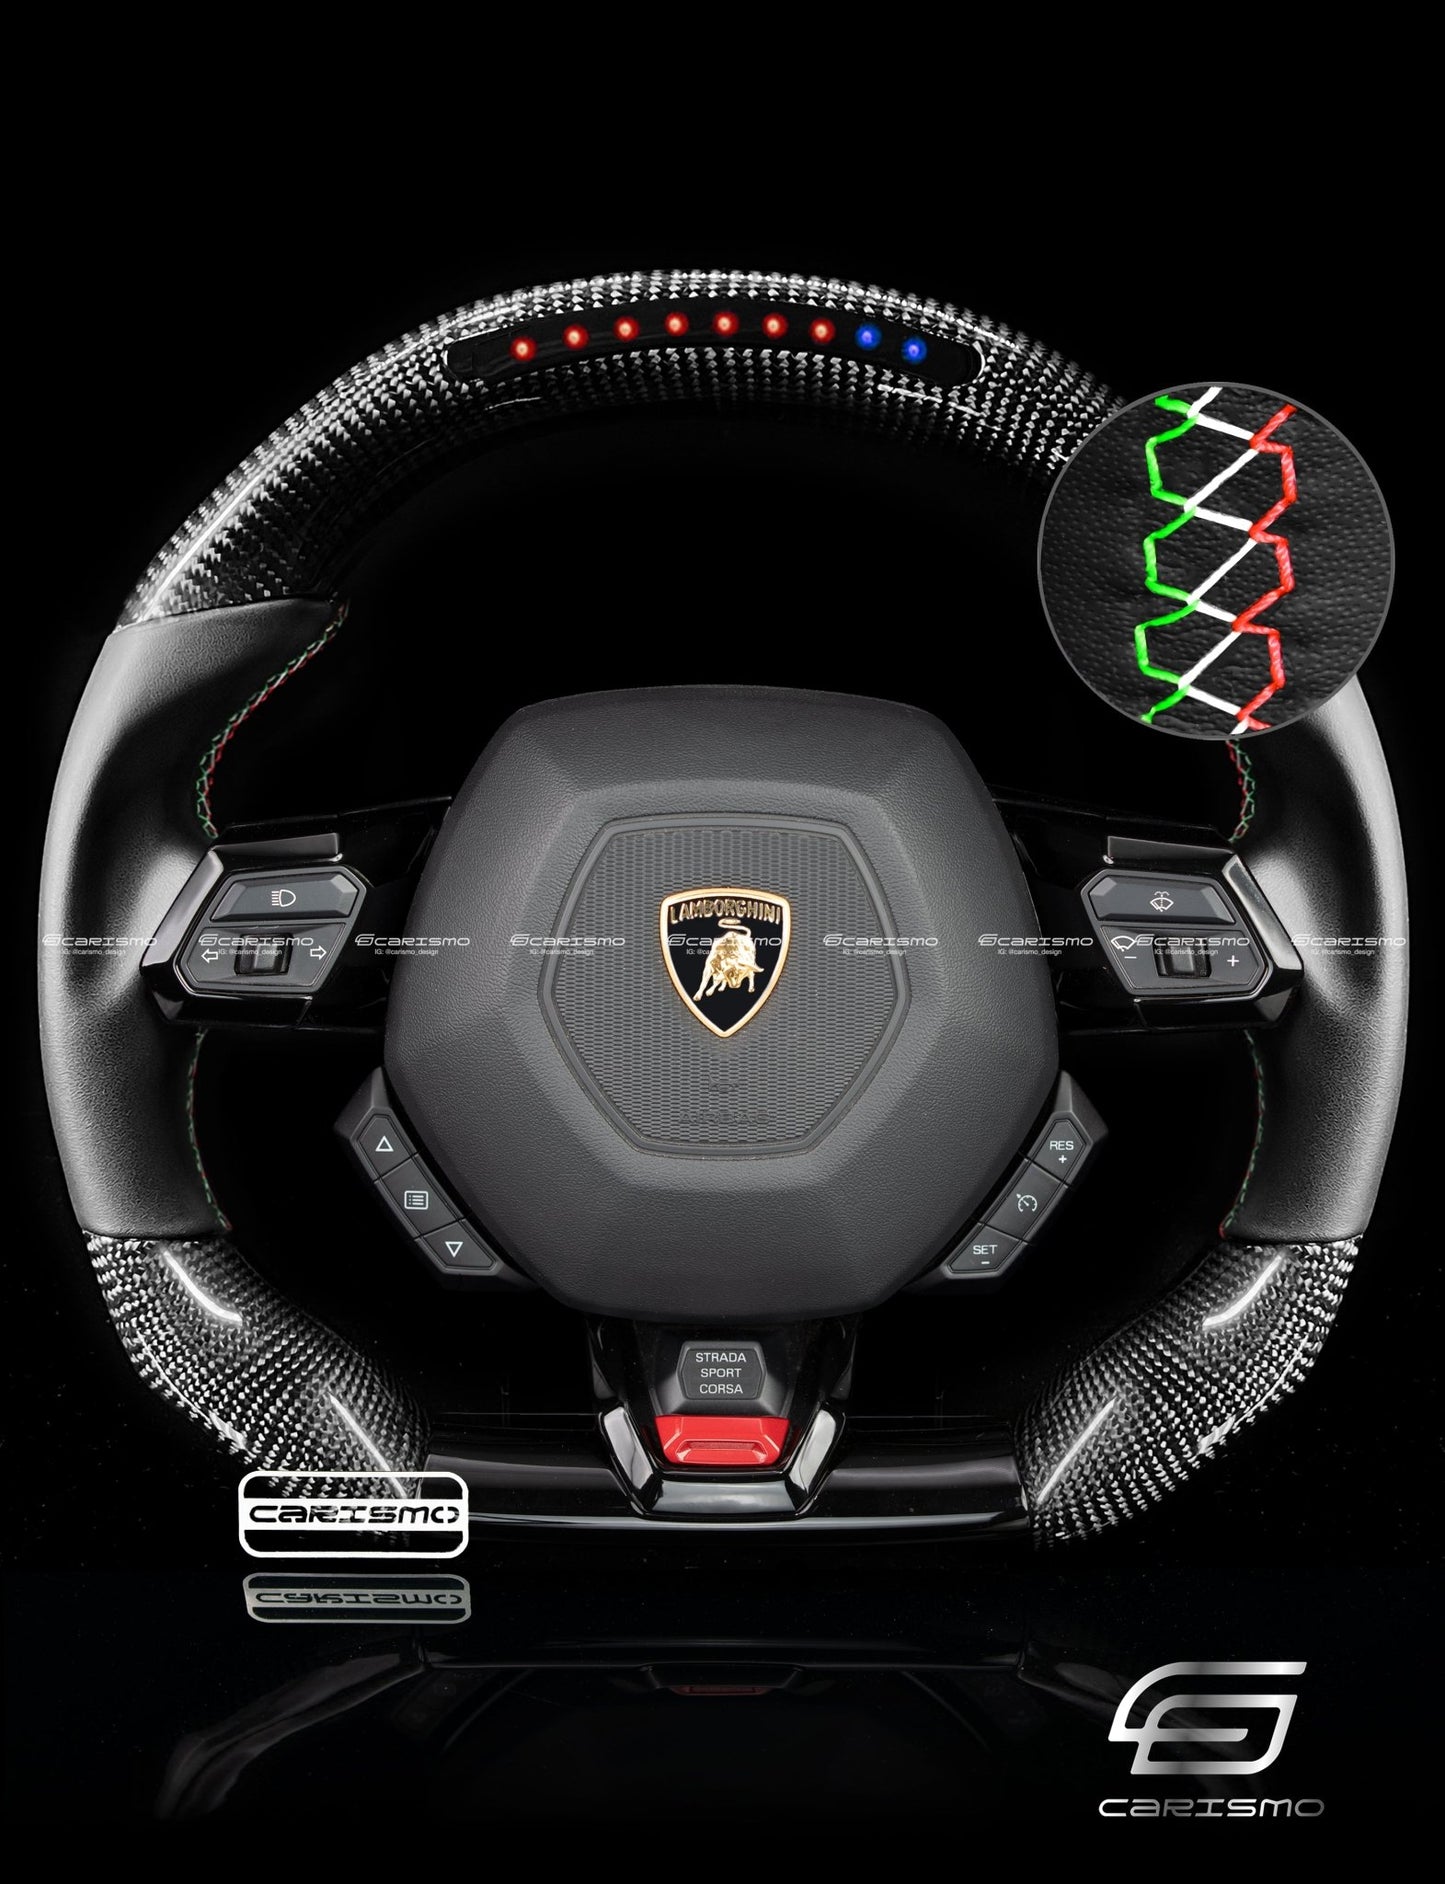 Carismo Steering Wheel For Lamborghini Huracan - Sequential RPM LED - Gloss Carbon - Smooth Leather - Carismo